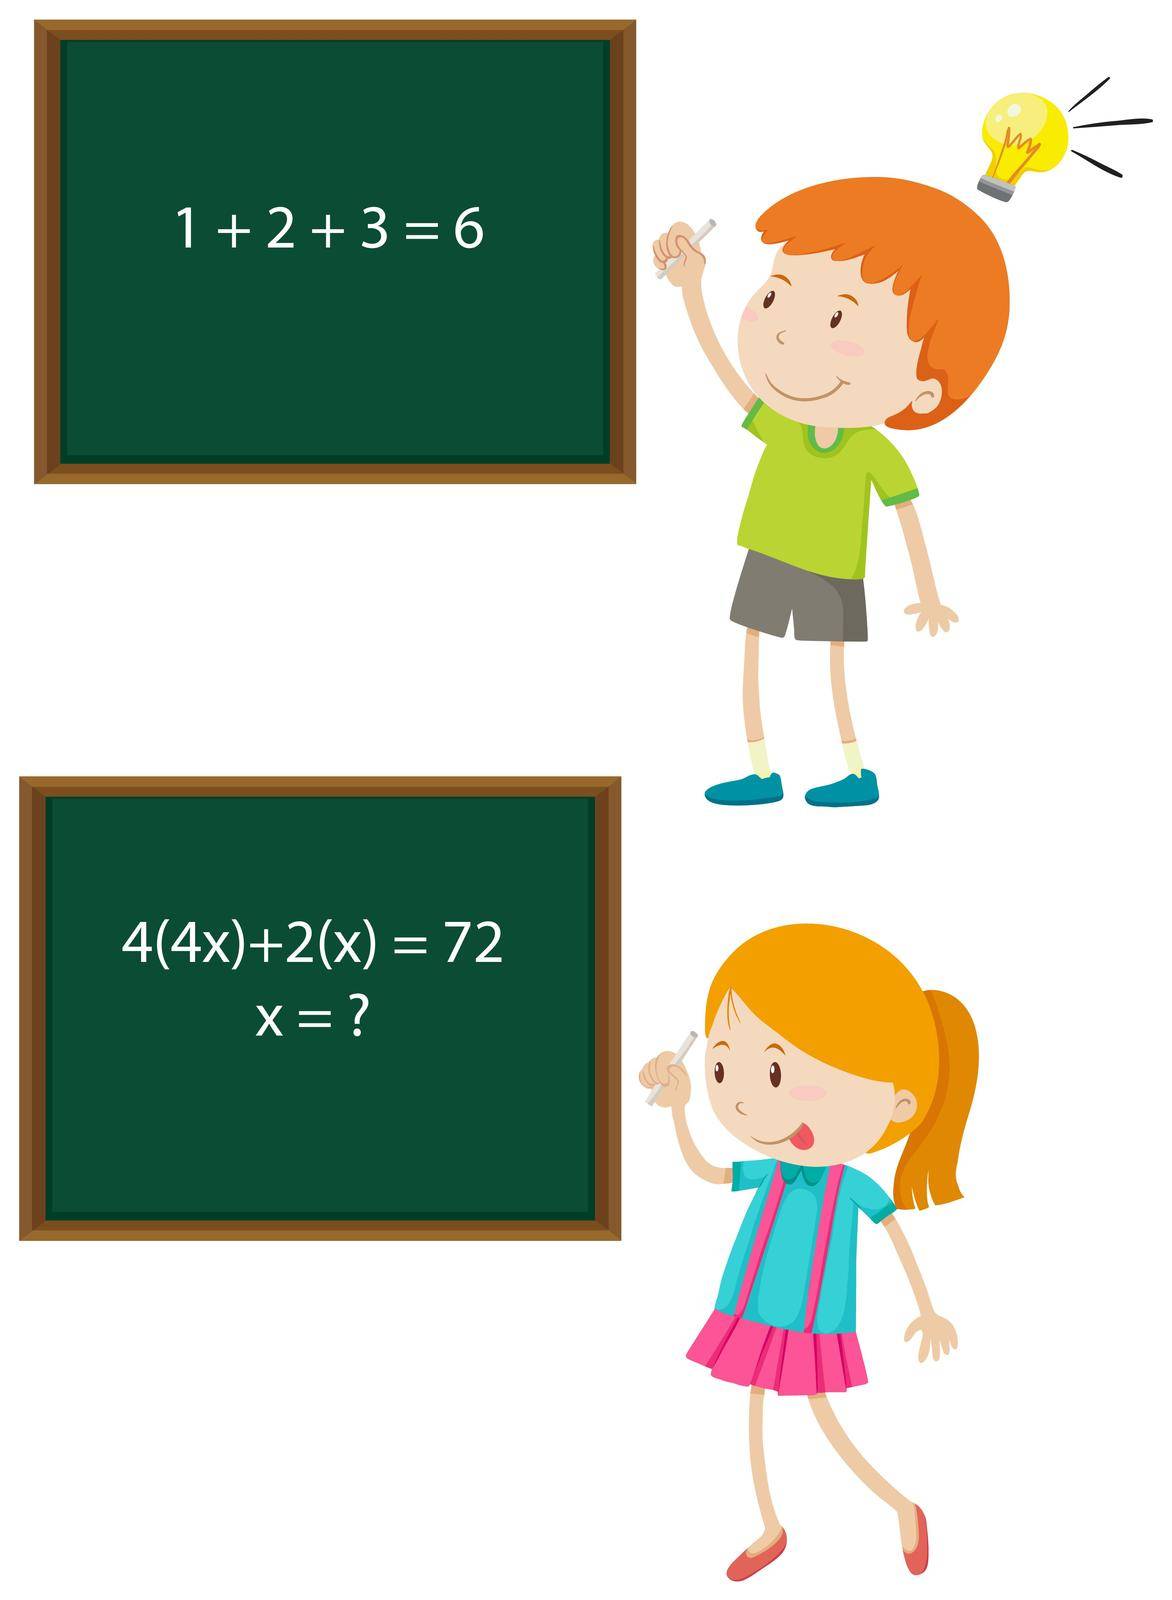 Children solving math problems by iimages